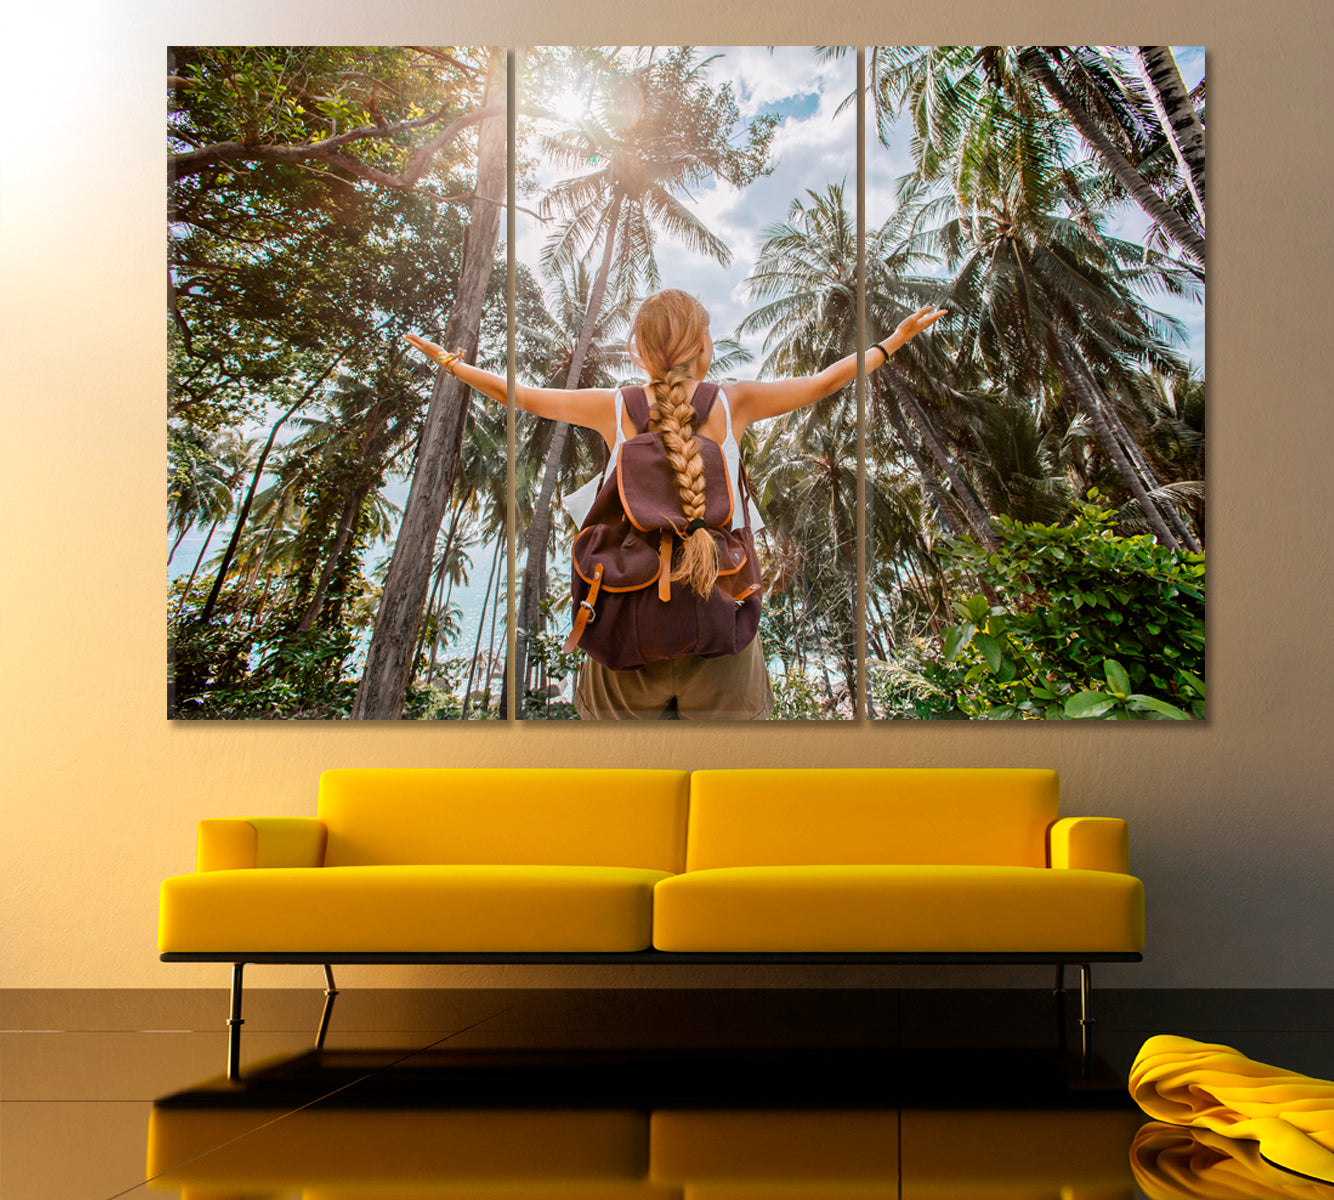 TRAVELING AROUND THE WORLD Girl in the Jungle Sport Active Lifestyle Concept Traveling Around Ink Canvas Print Artesty 3 panels 36" x 24" 